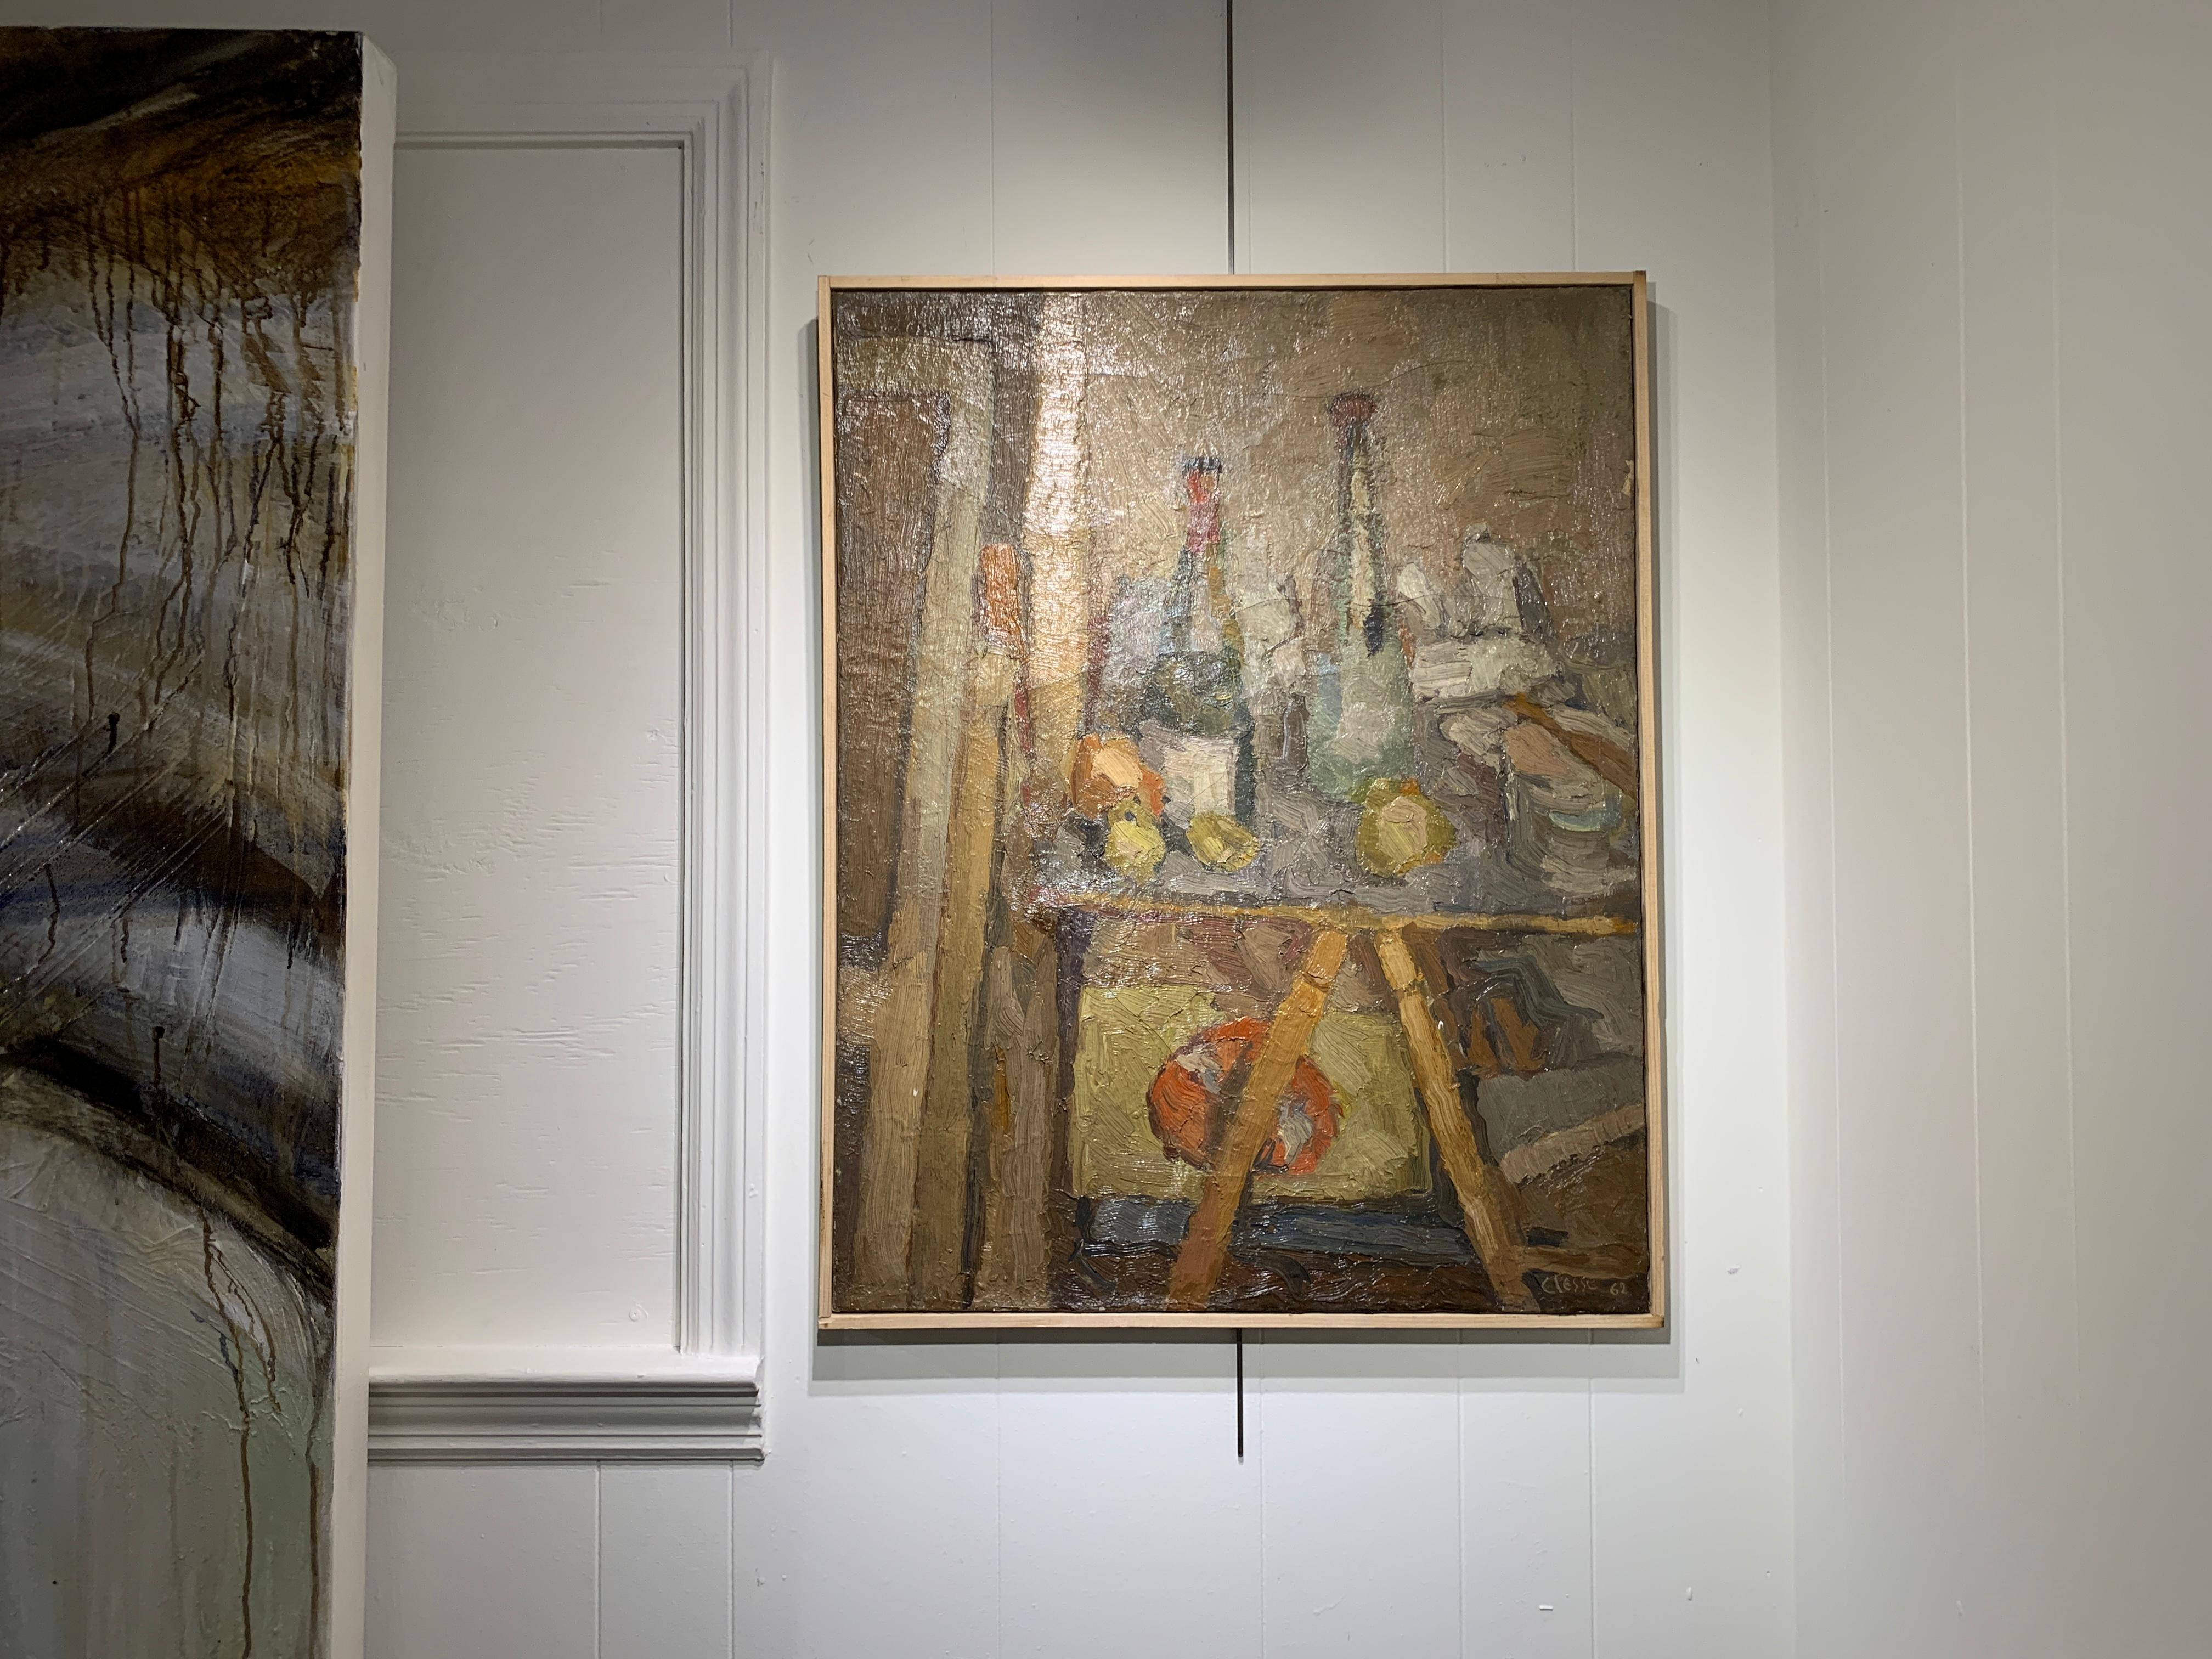 'Nature Morte' is a medium size oil on board painting created by French artist Daniel Clesse in 1962. Featuring a palette made of beige, brown and green tones, the painting is an abstracted representation of a still-life (a 'nature morte' in